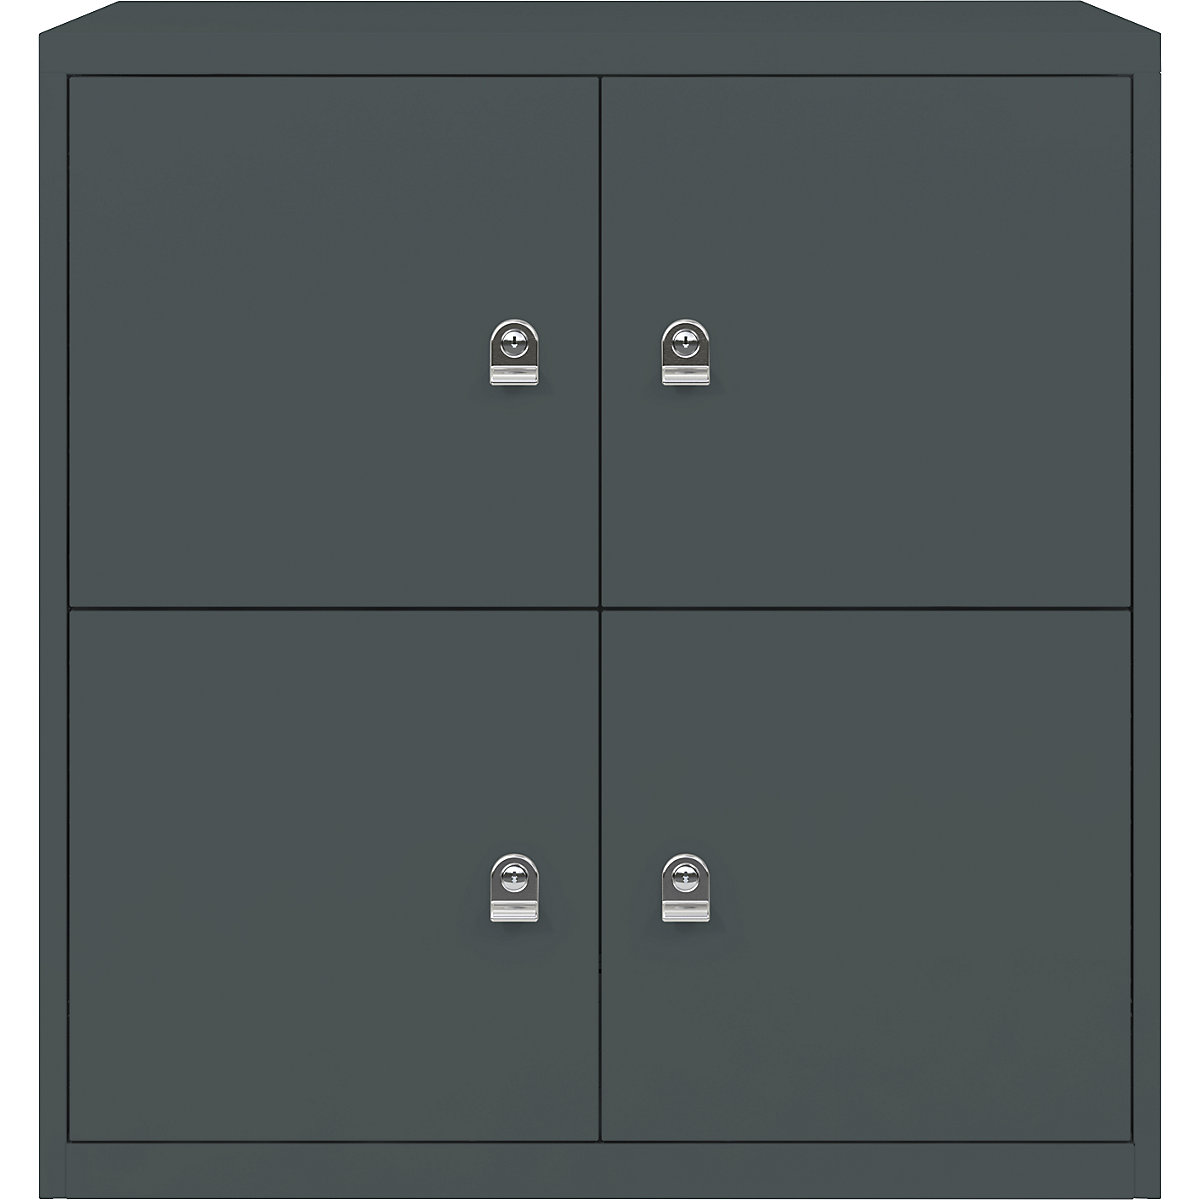 LateralFile™ lodge – BISLEY, with 4 lockable compartments, height 375 mm each, slate